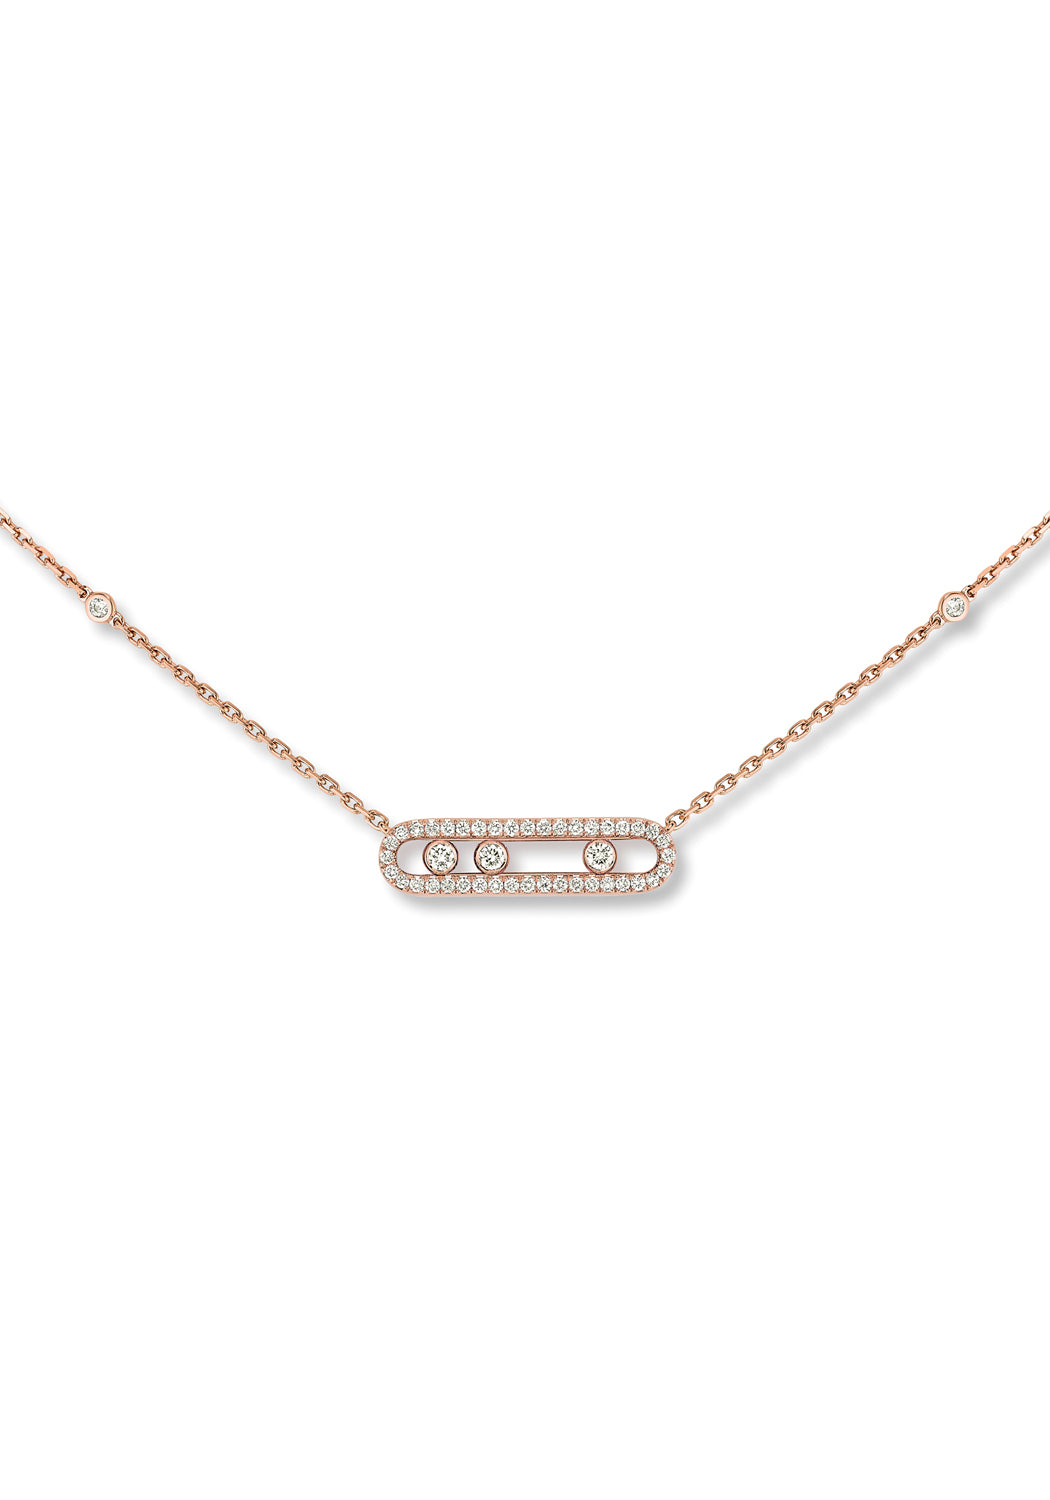 Messika Baby Move Pave Diamond Rose Gold Necklace | Ref. 04322-PG | OsterJewelers.com